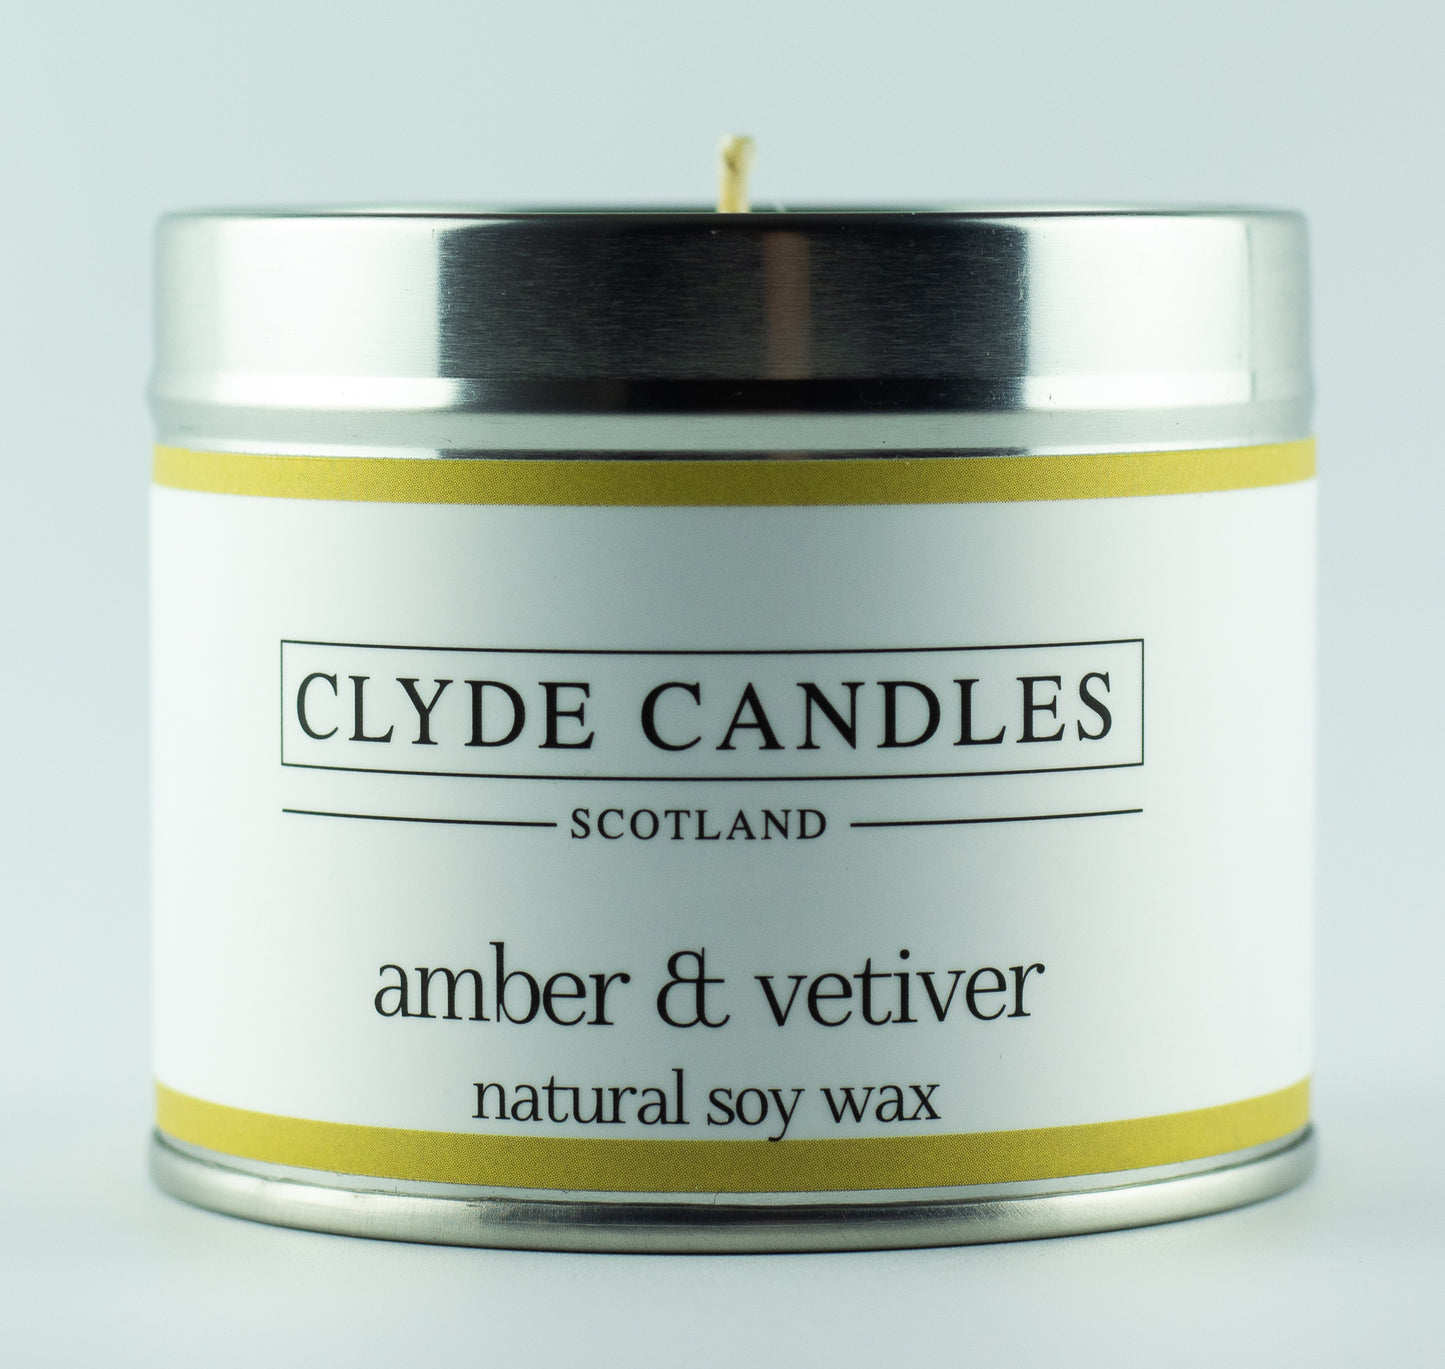 Amber & Vetiver Scented Candle Tin, Luxury Natural Soy wax, Scottish Candles, Clyde Candles